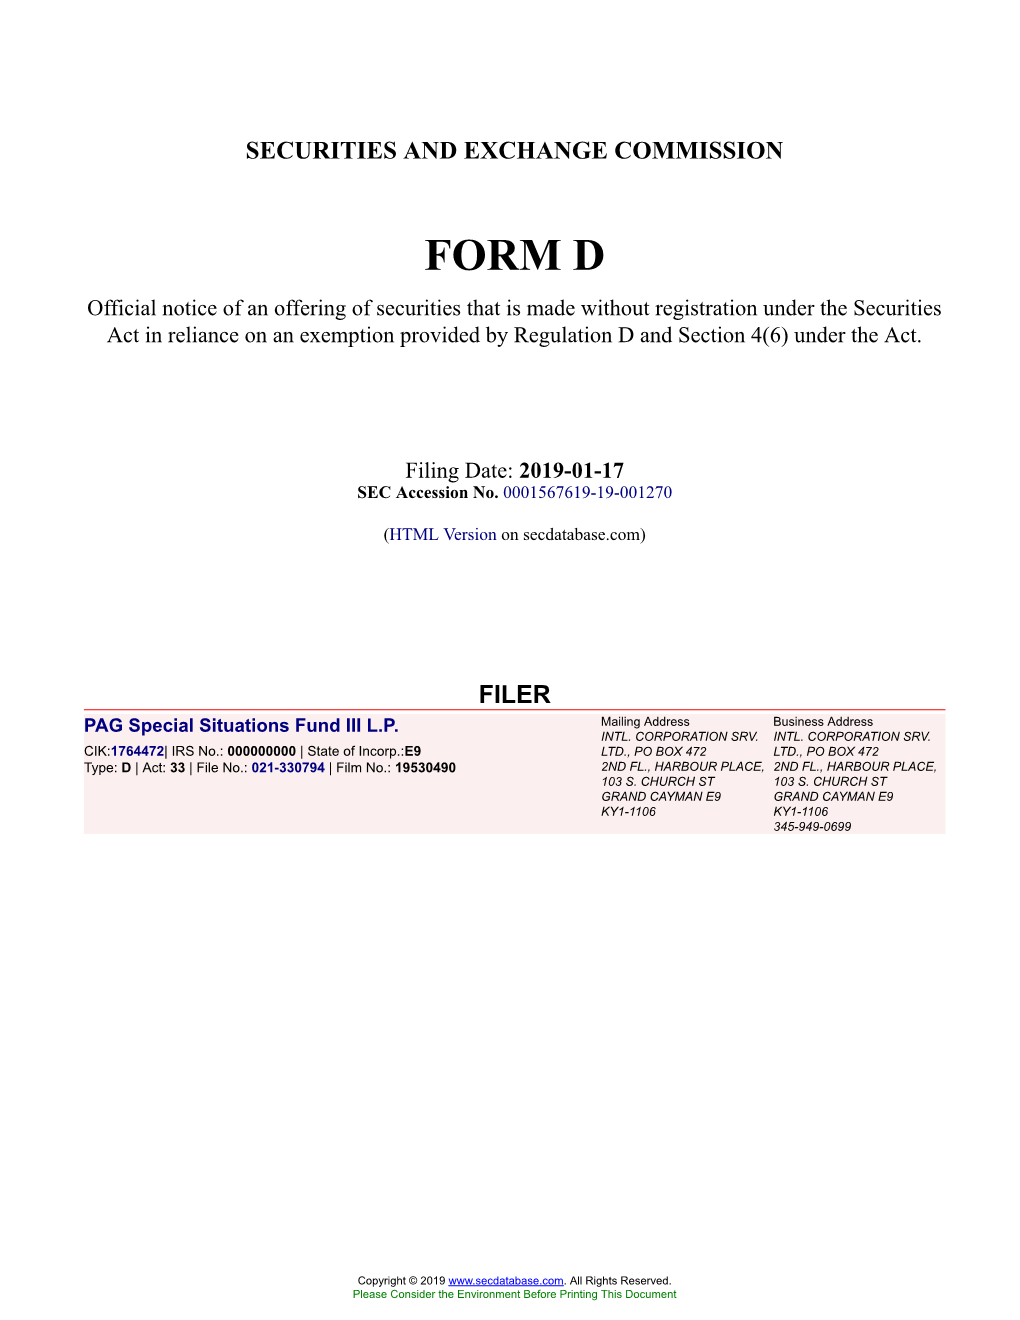 PAG Special Situations Fund III L.P. Form D Filed 2019-01-17